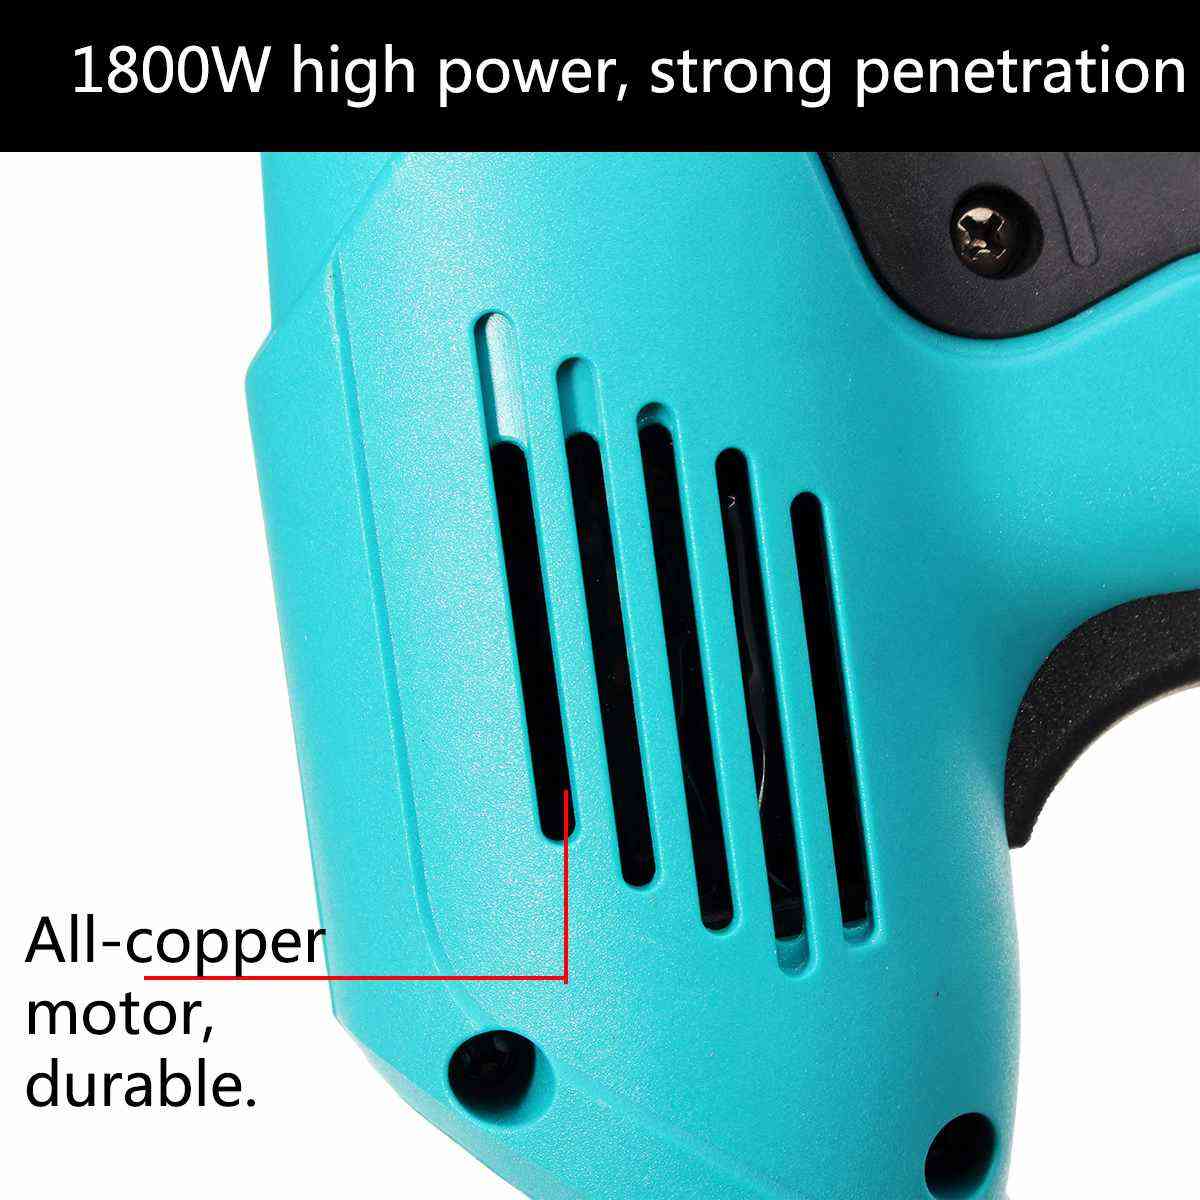 Electric Straight Nail-gun For Woodworking Electrical, Staple Tacker Gun Tool